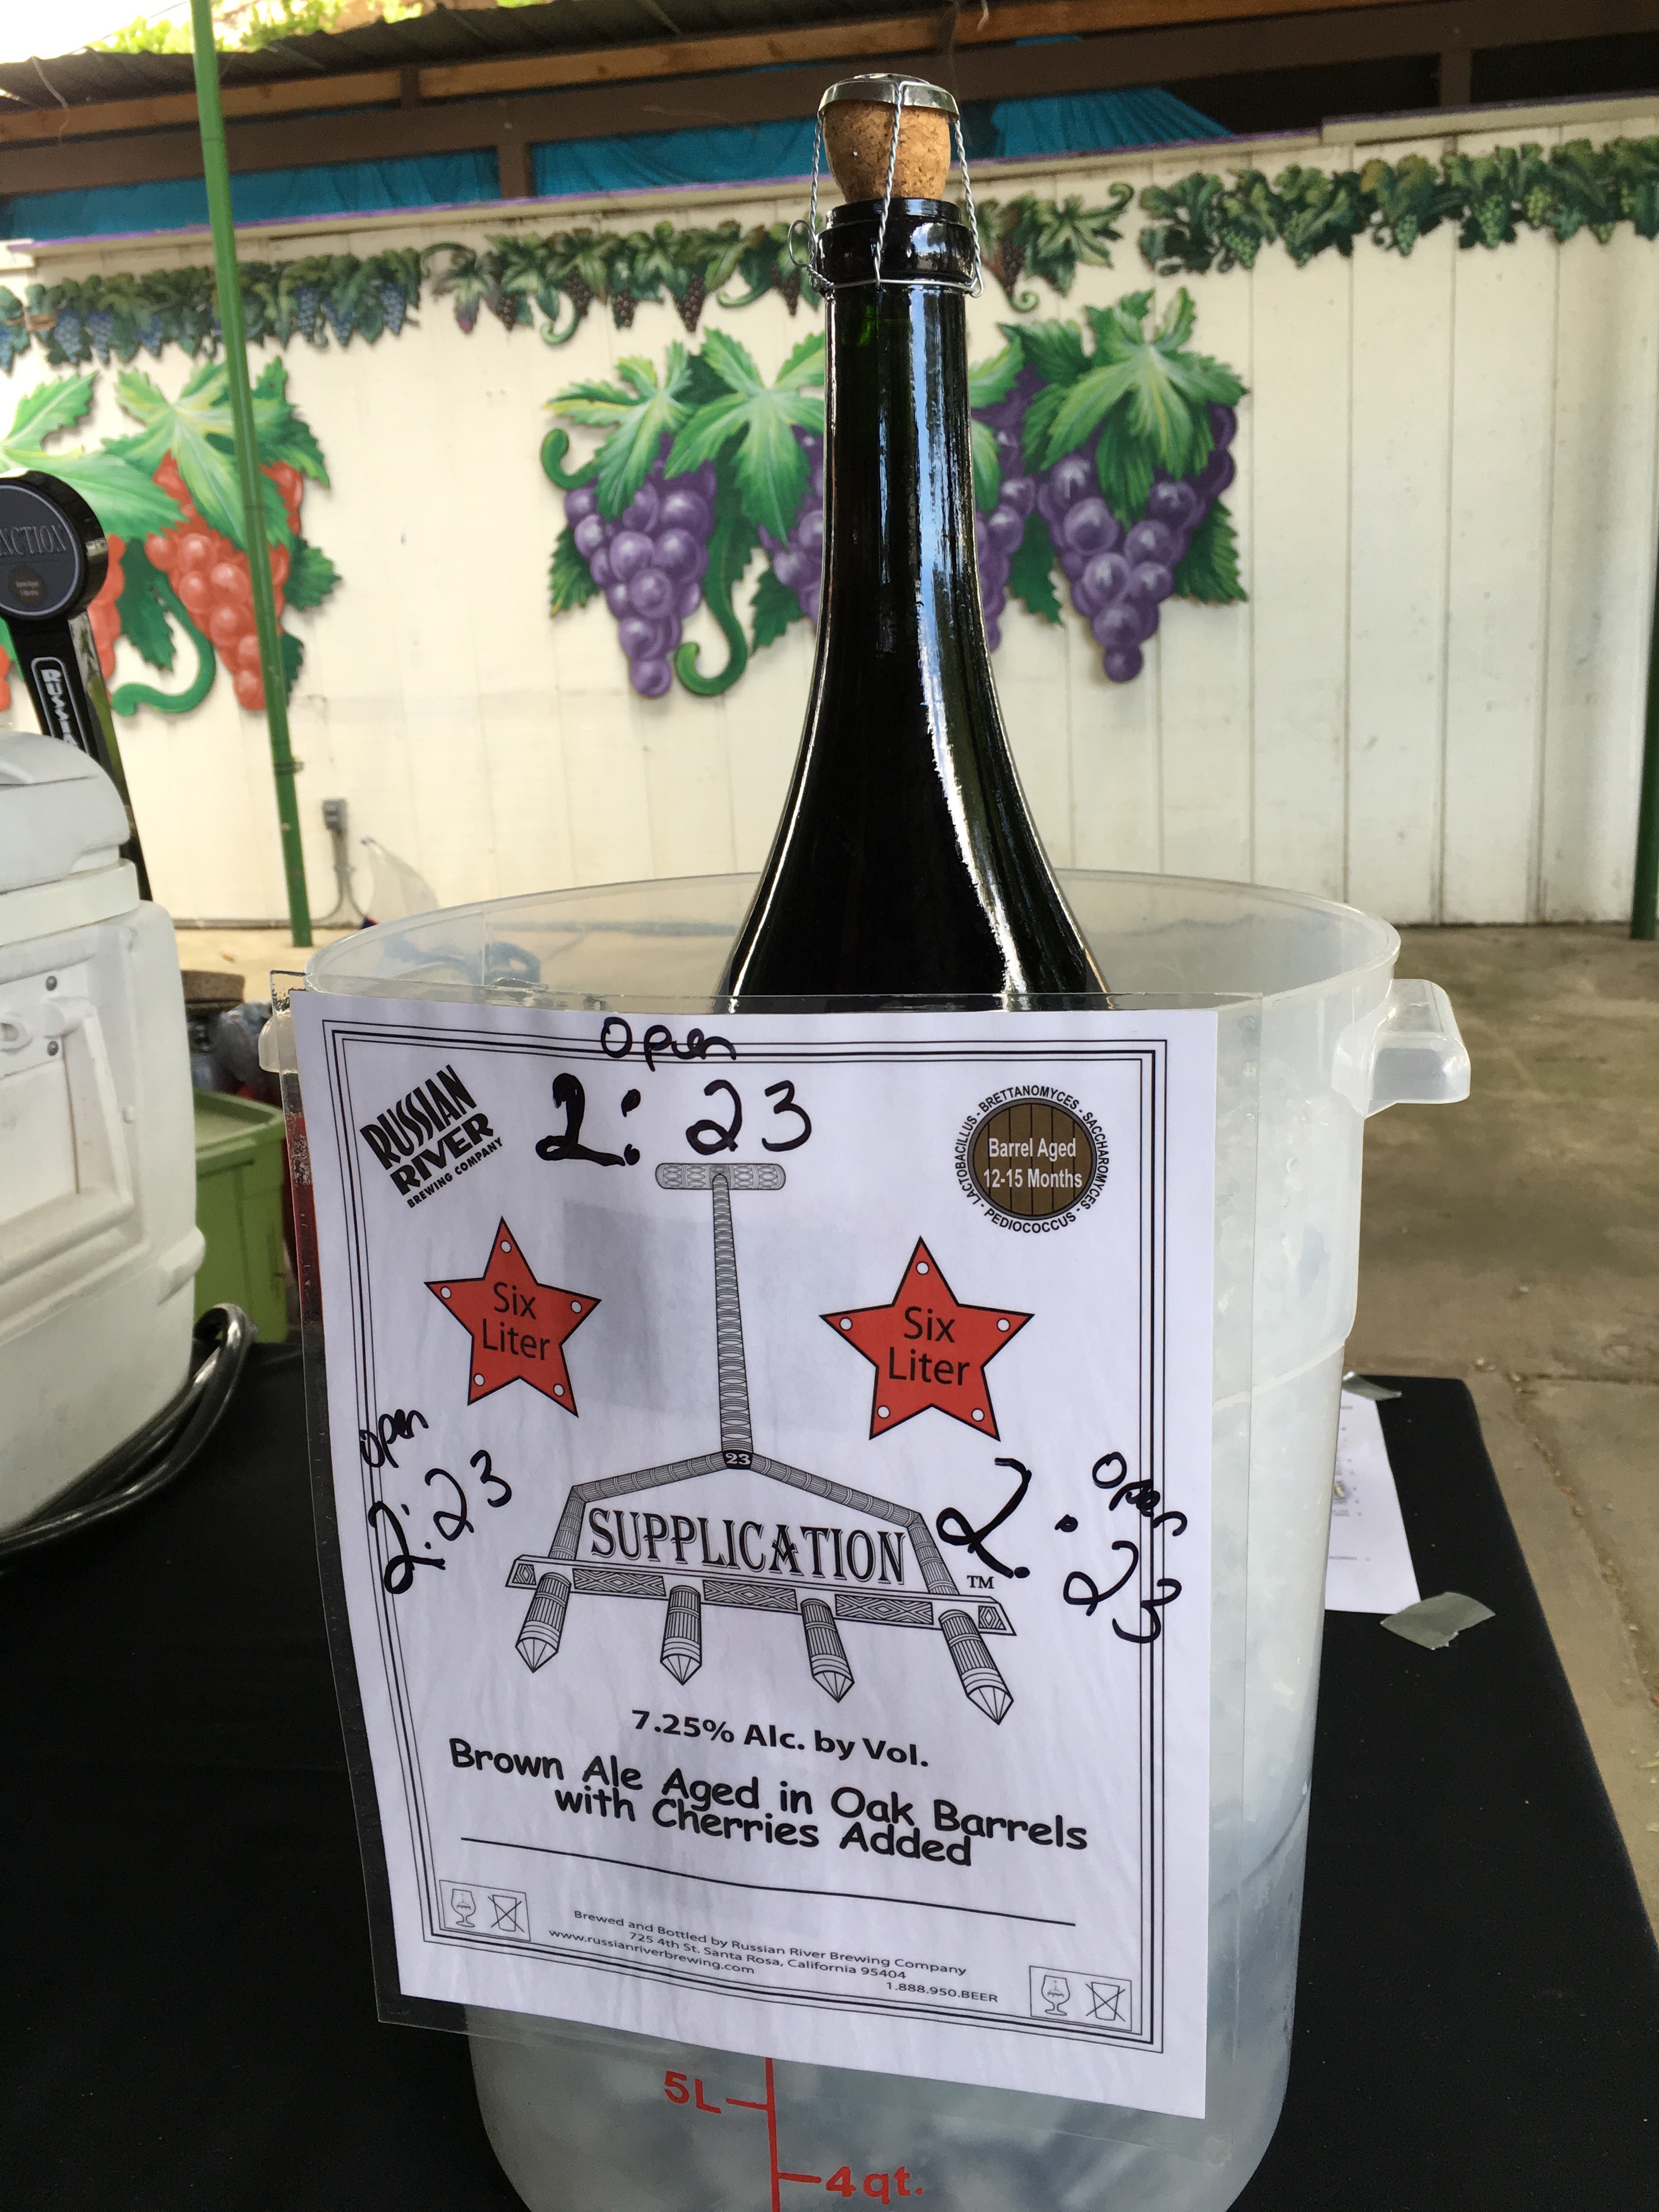 The anticipation builds for the two 6 liter bottles of 2009 Russian River Supplication during the 2016 Firestone Walker Invitational Beer Fest.